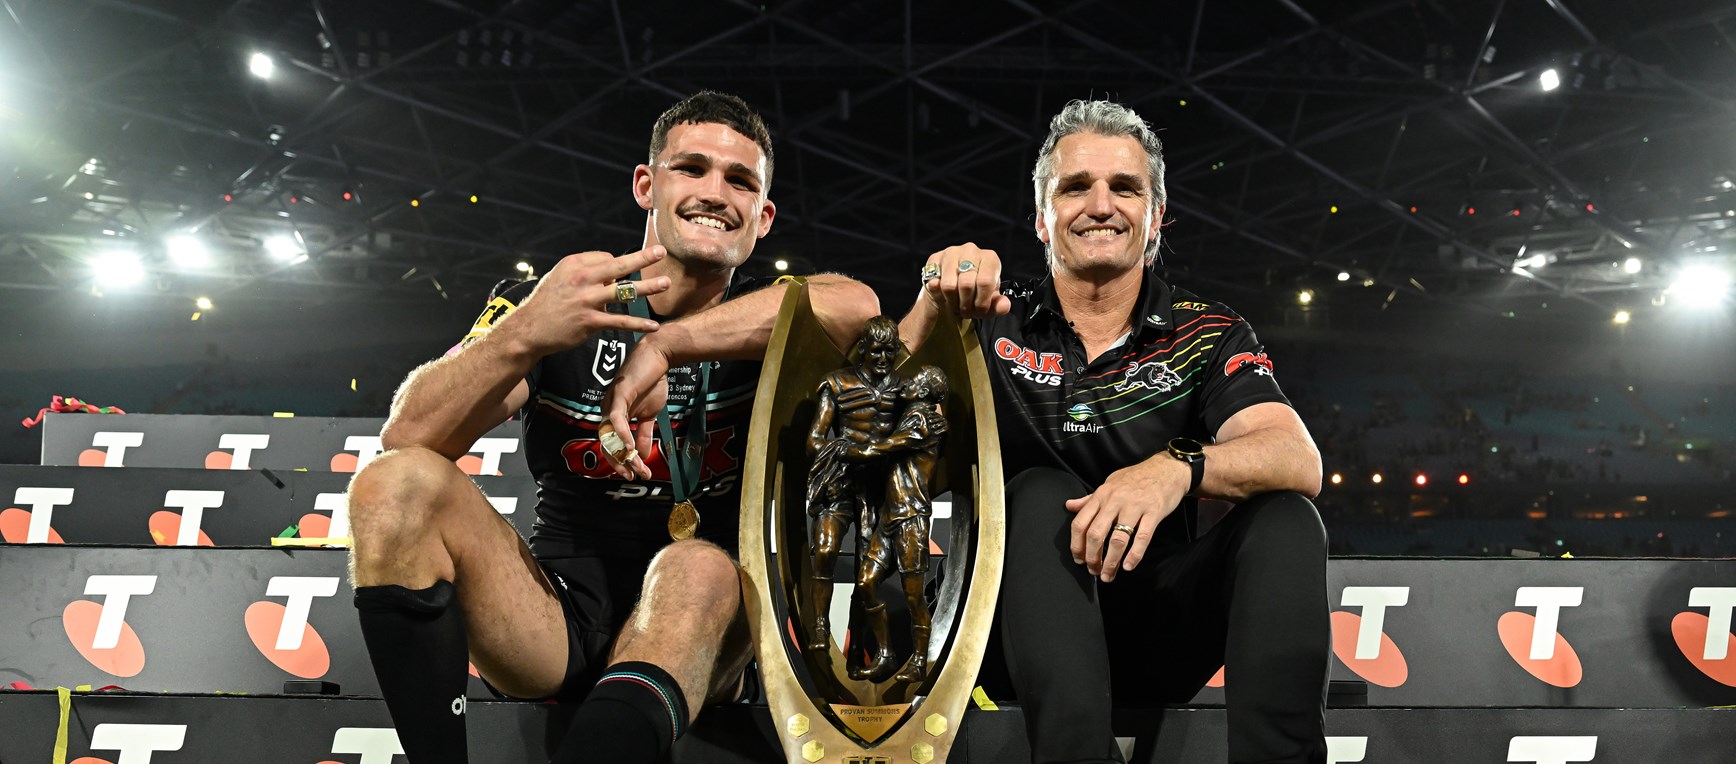 As it happened: Panthers, Knights defend premiership titles